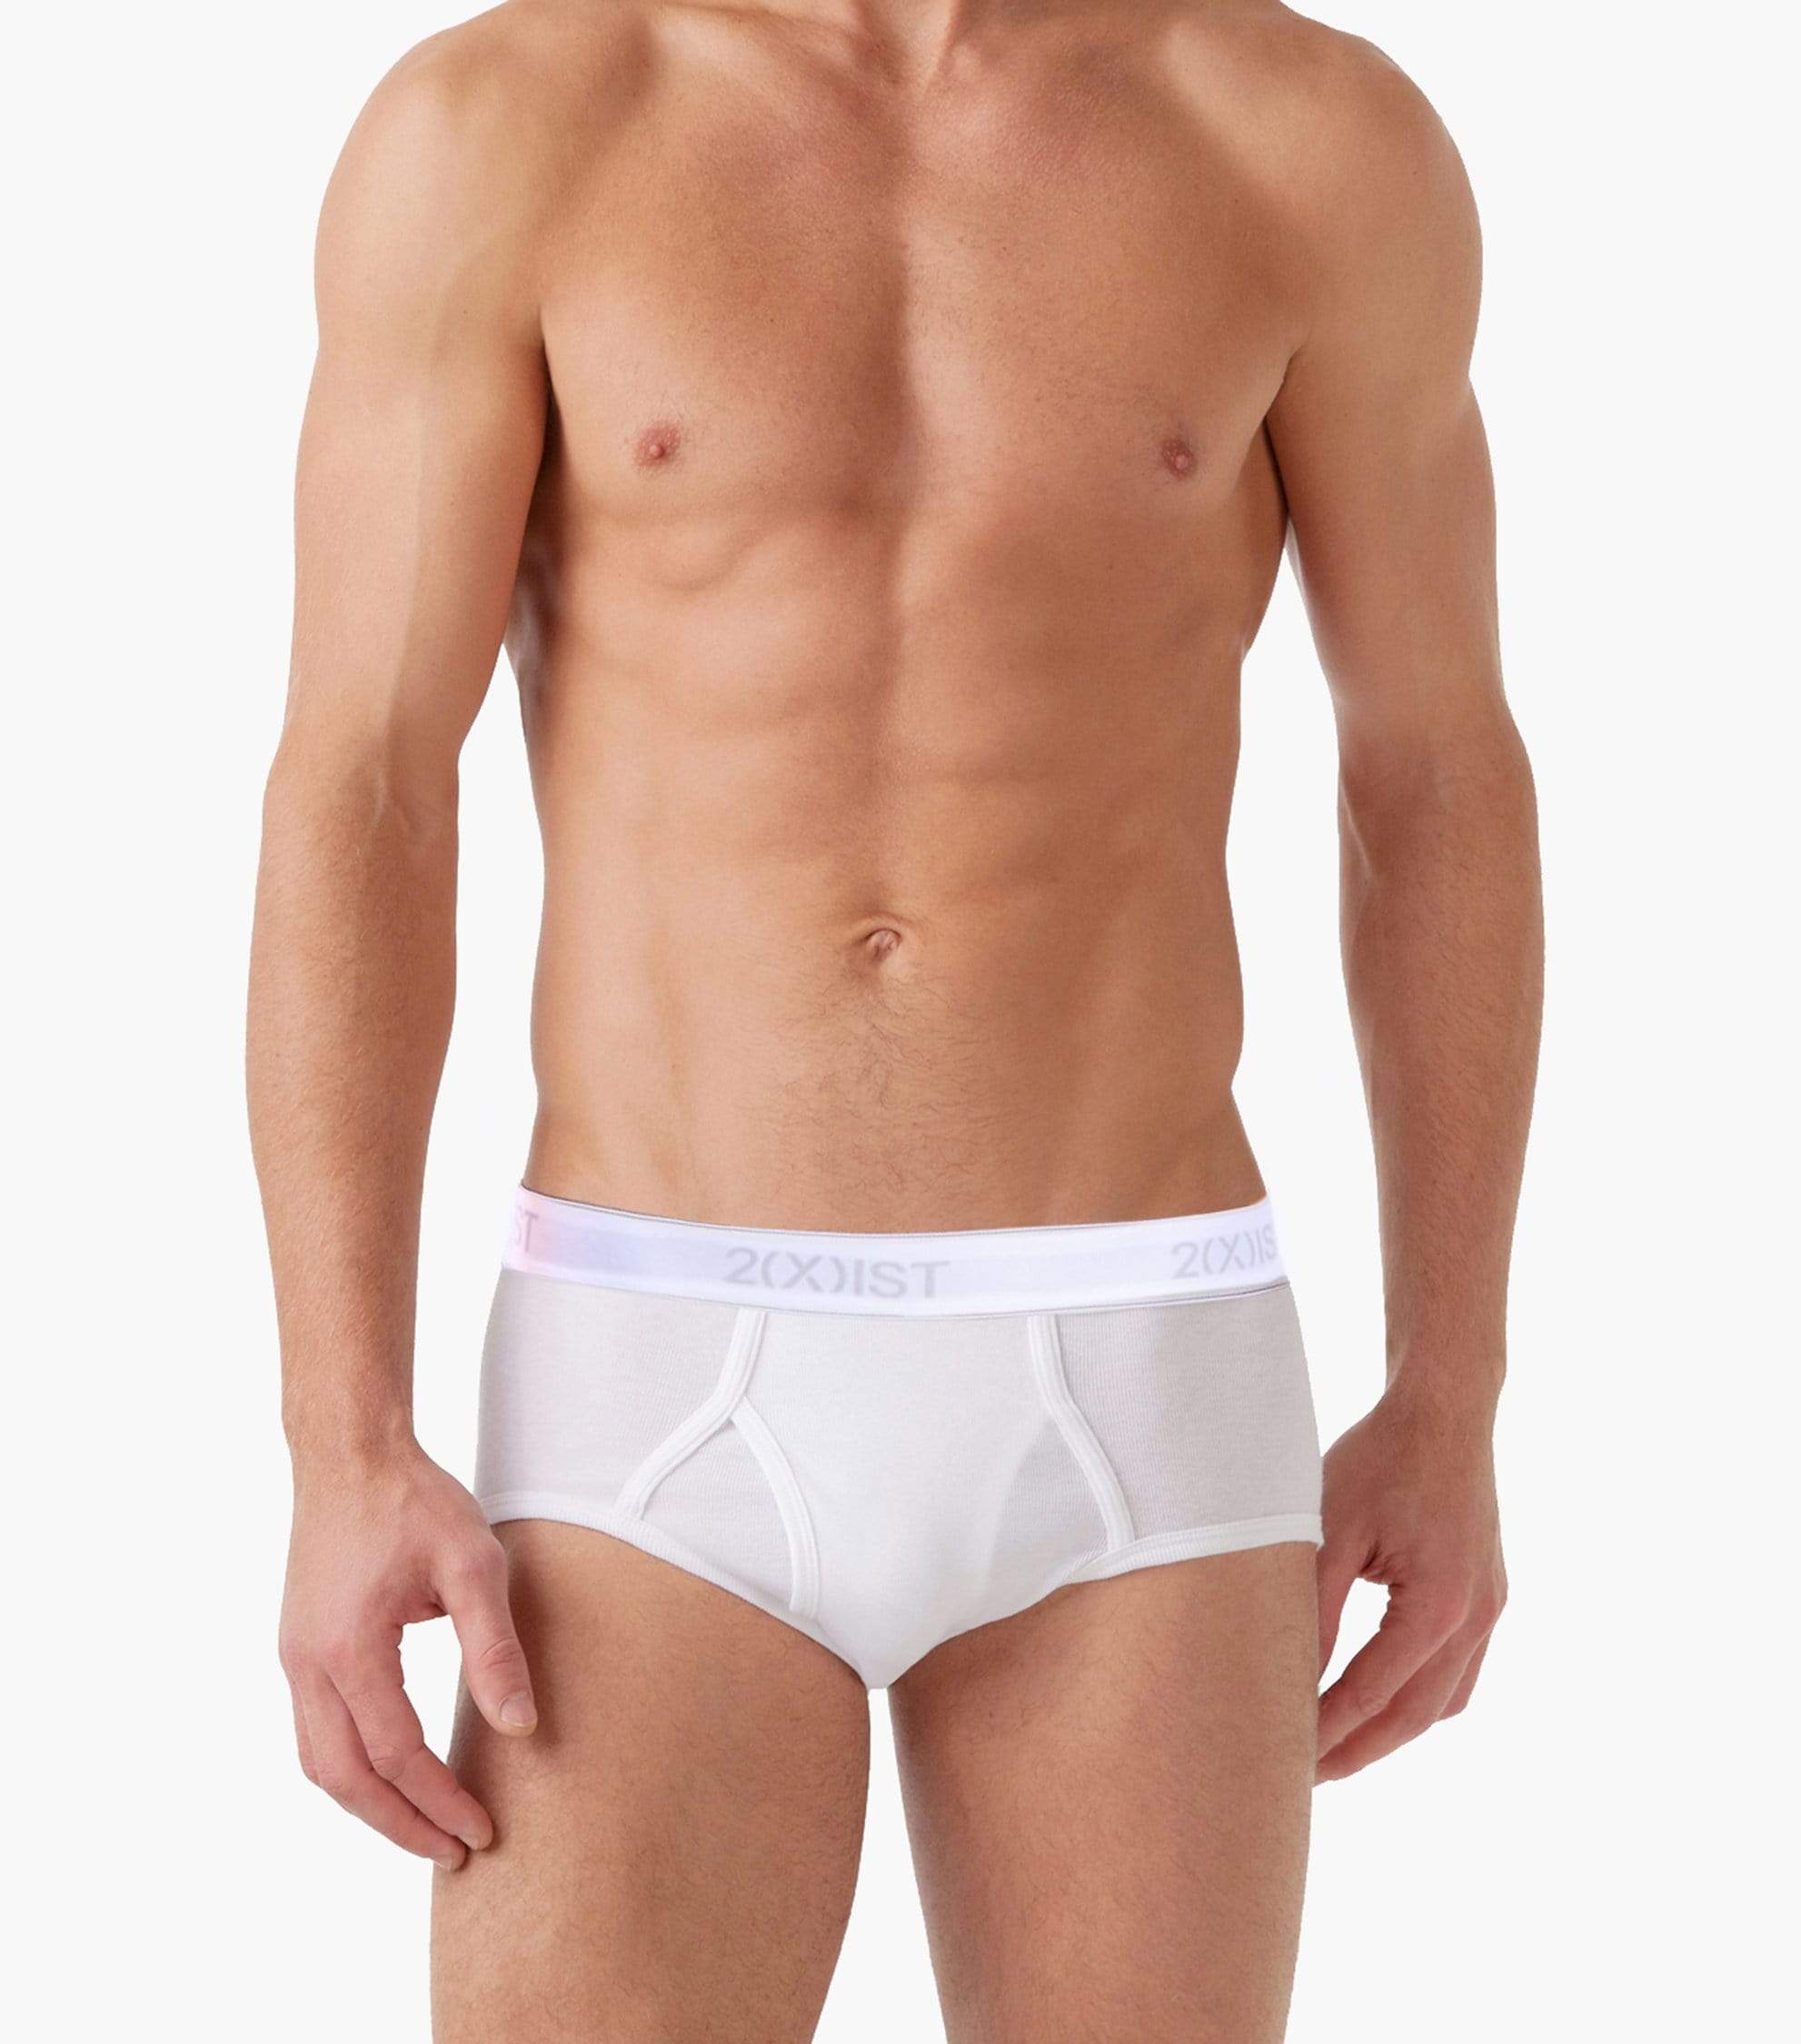 Men's Luxe Boxers (3 Pack) - White – Lounge Underwear